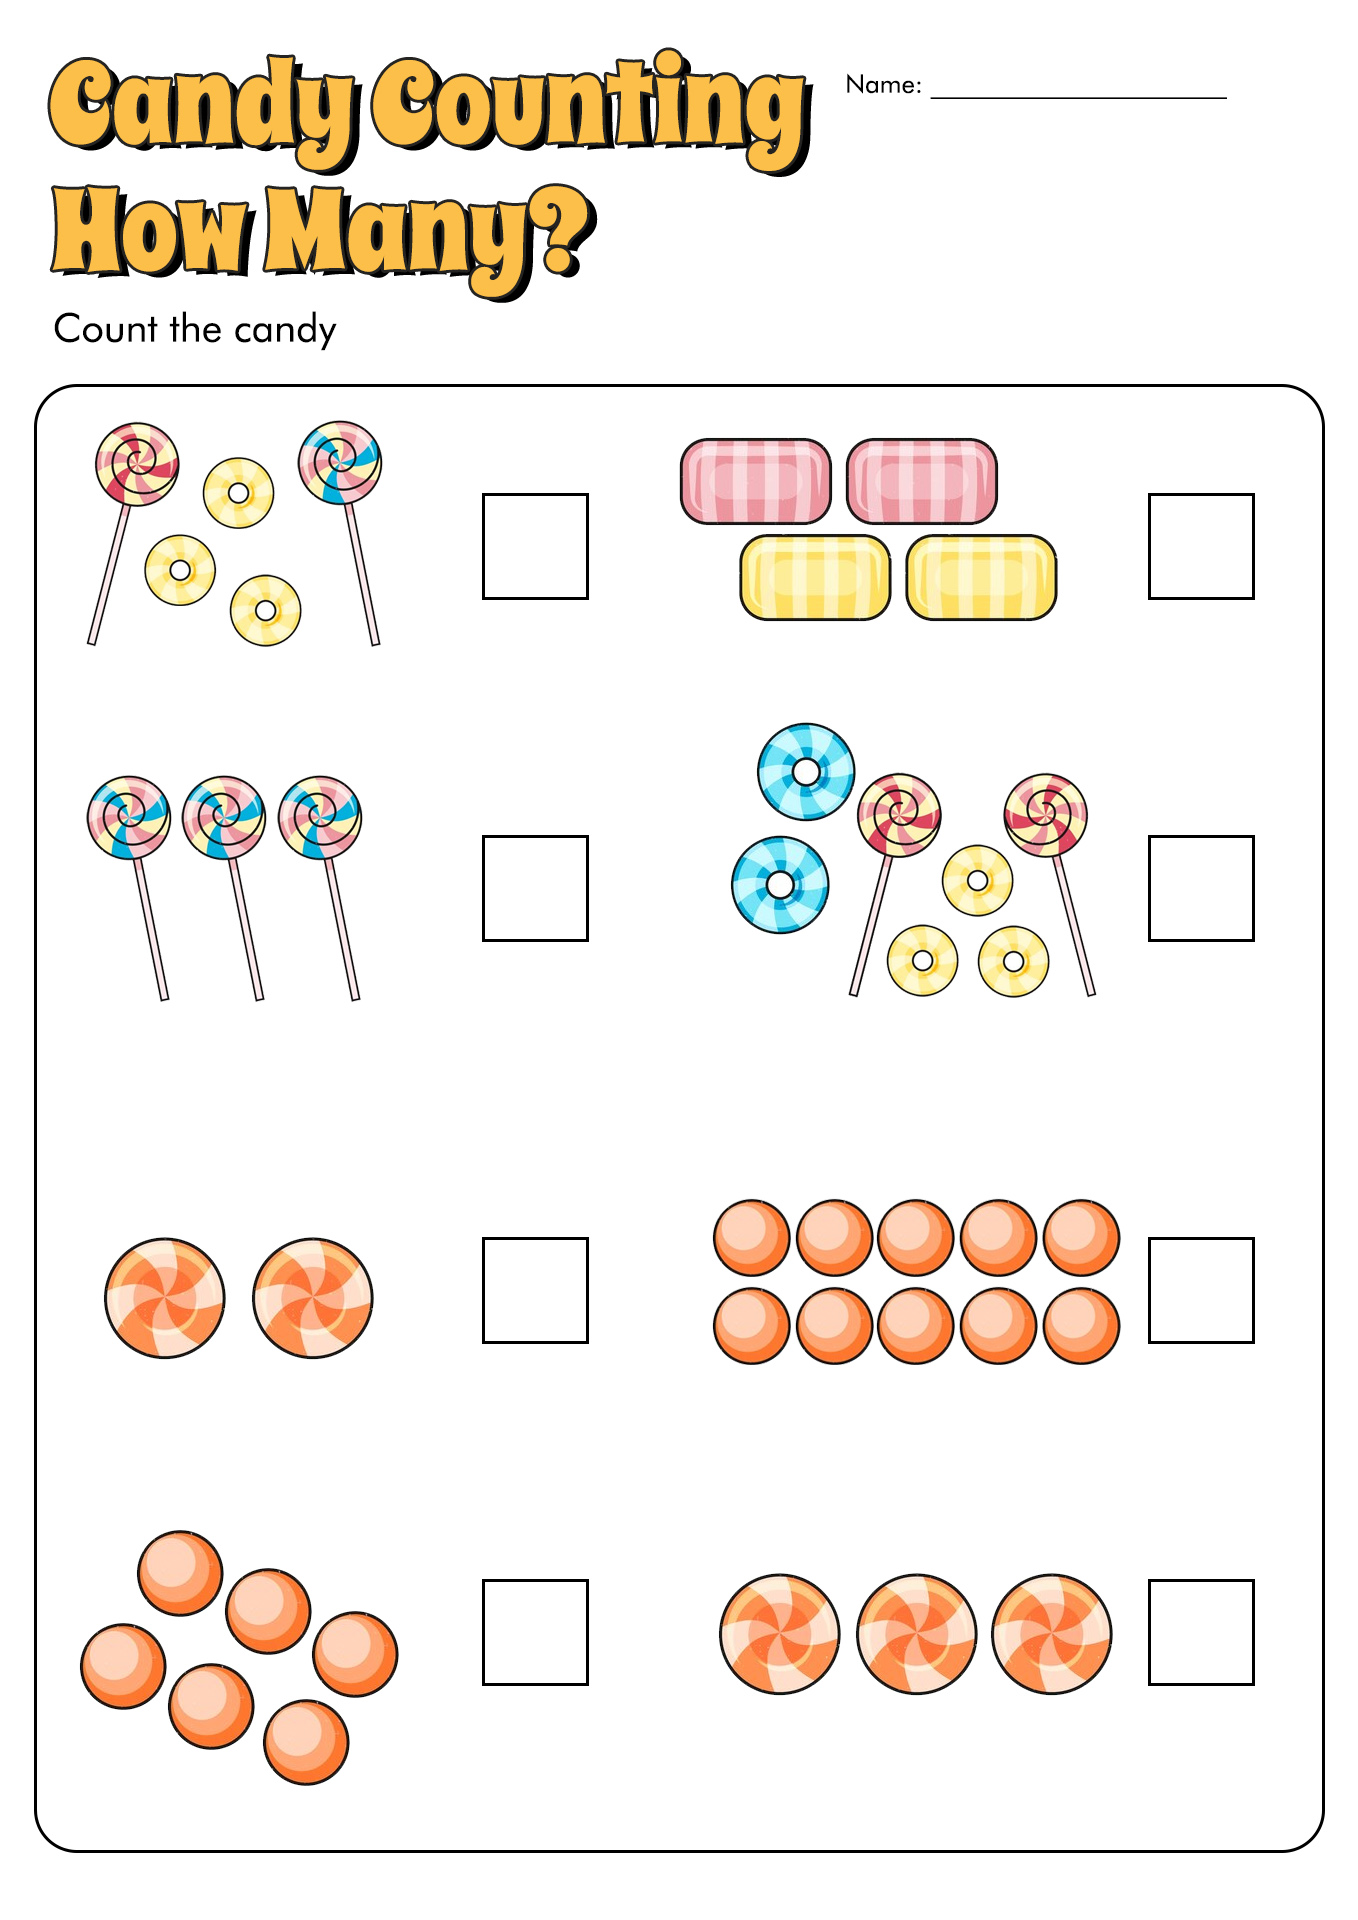 17-best-images-of-count-how-many-11-20-worksheets-how-many-counting-worksheets-kindergarten